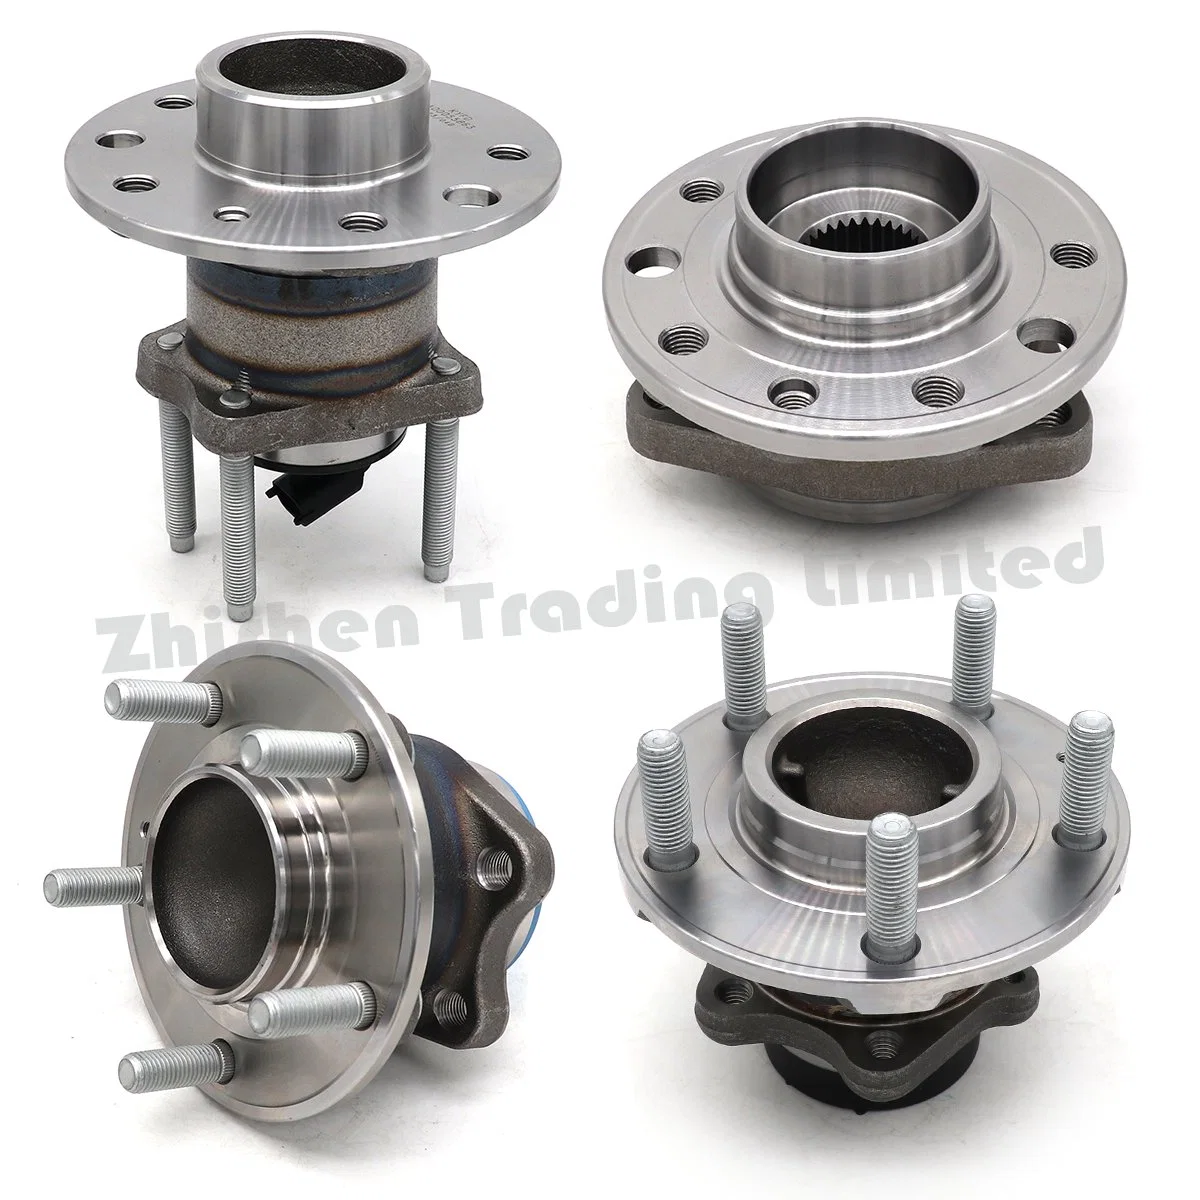 Baic Auto Spare Part Auto Accessory Car Spare Part Vehicle Part Automobile Part Front and Rear Wheel Hub Bearing Assembly Bearing Head for Weiwang Changhe